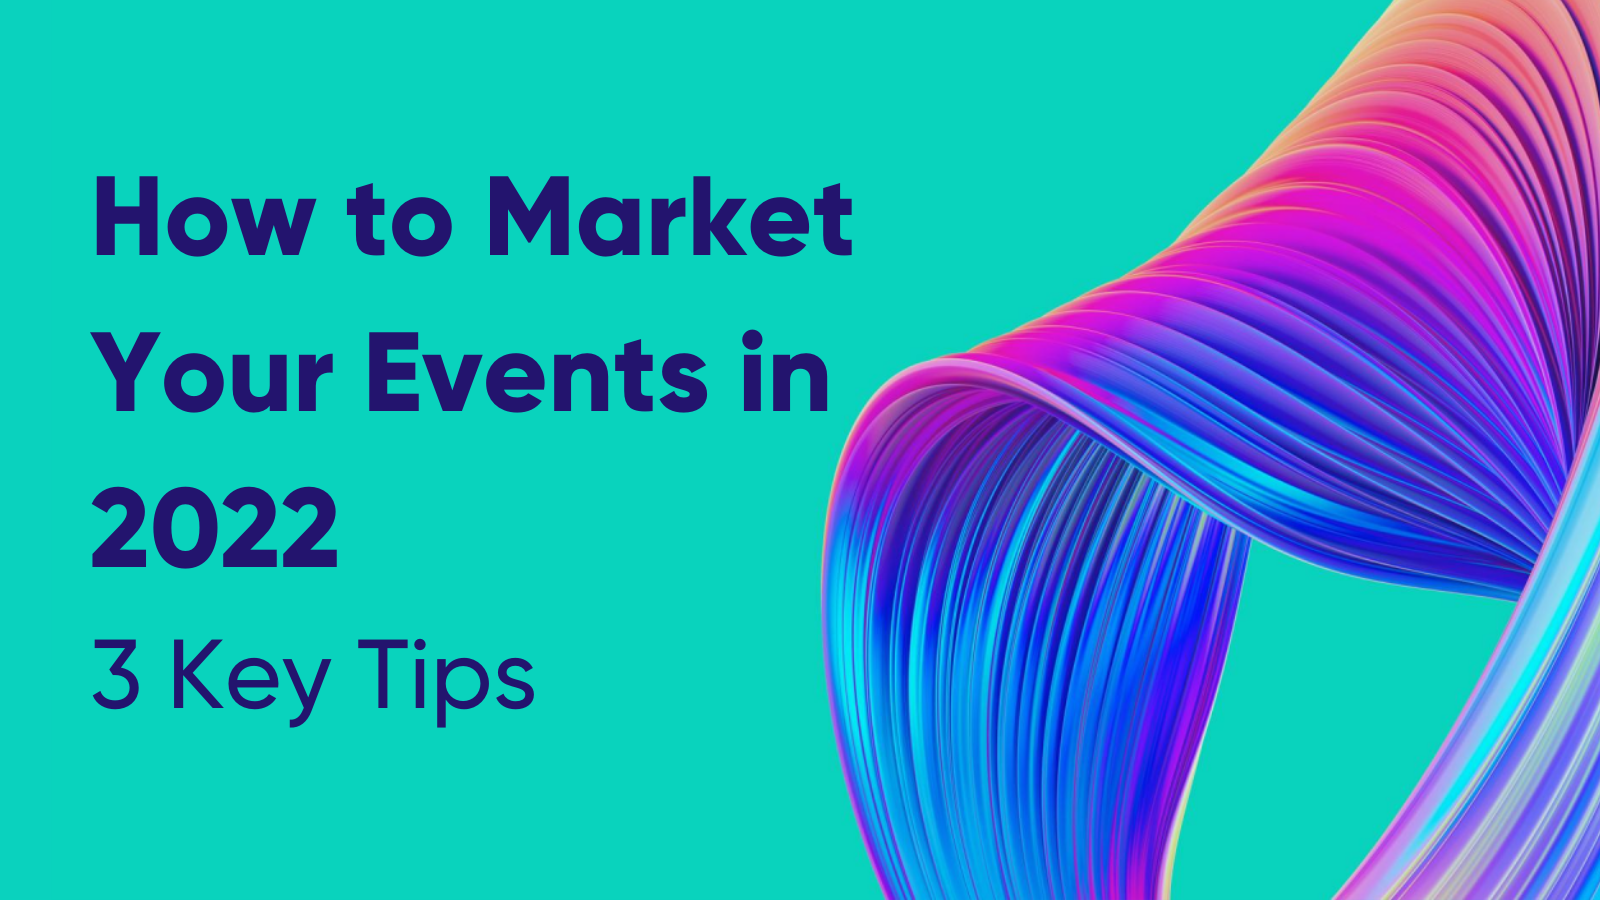 How to Market Your Events in 2022 - The Power of Digital